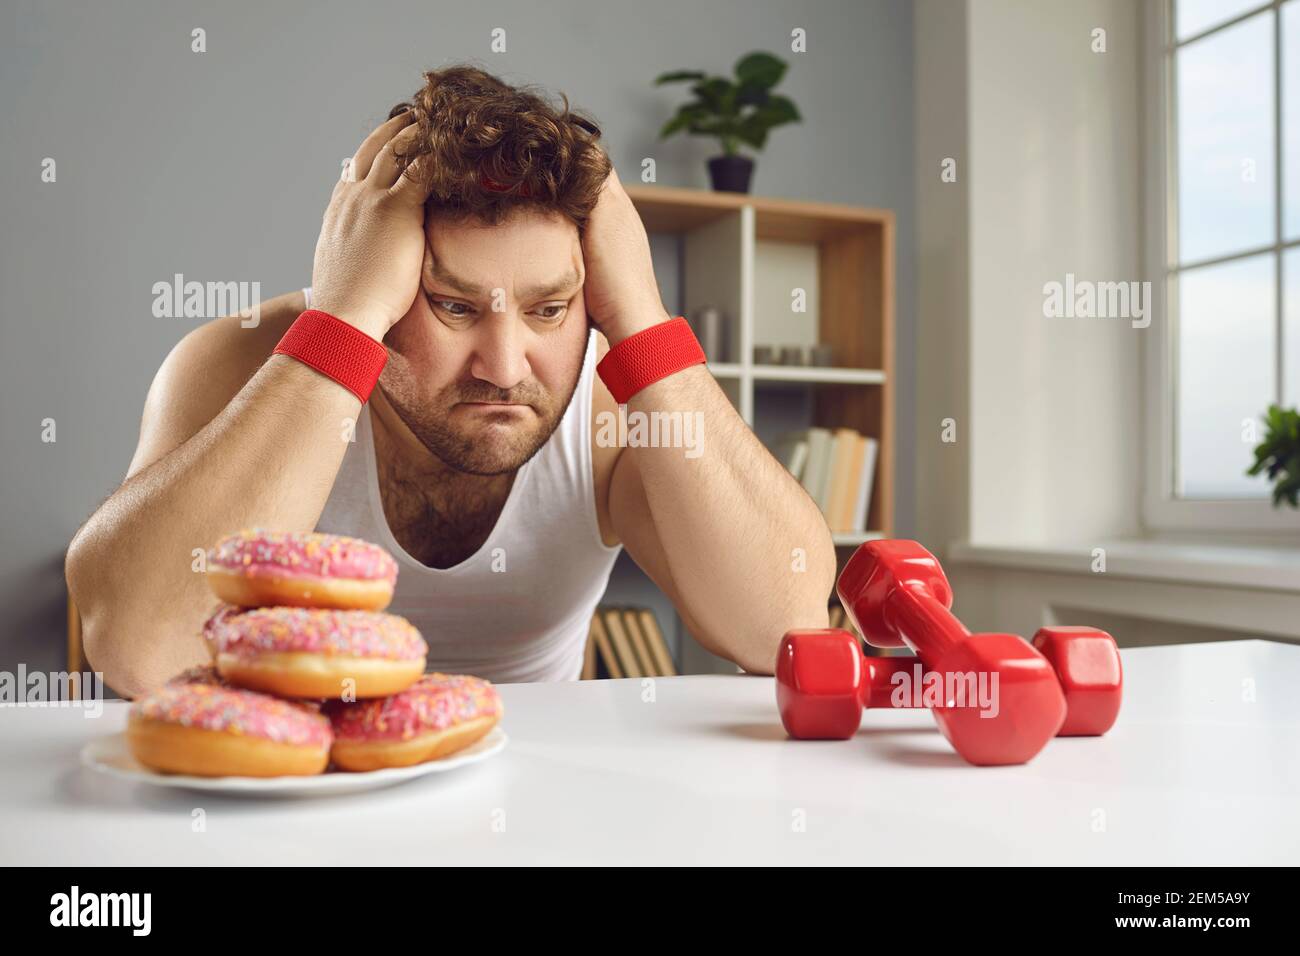 Sad man looking at dumbbells and donuts choosing between healthy and unhealthy lifestyle Stock Photo